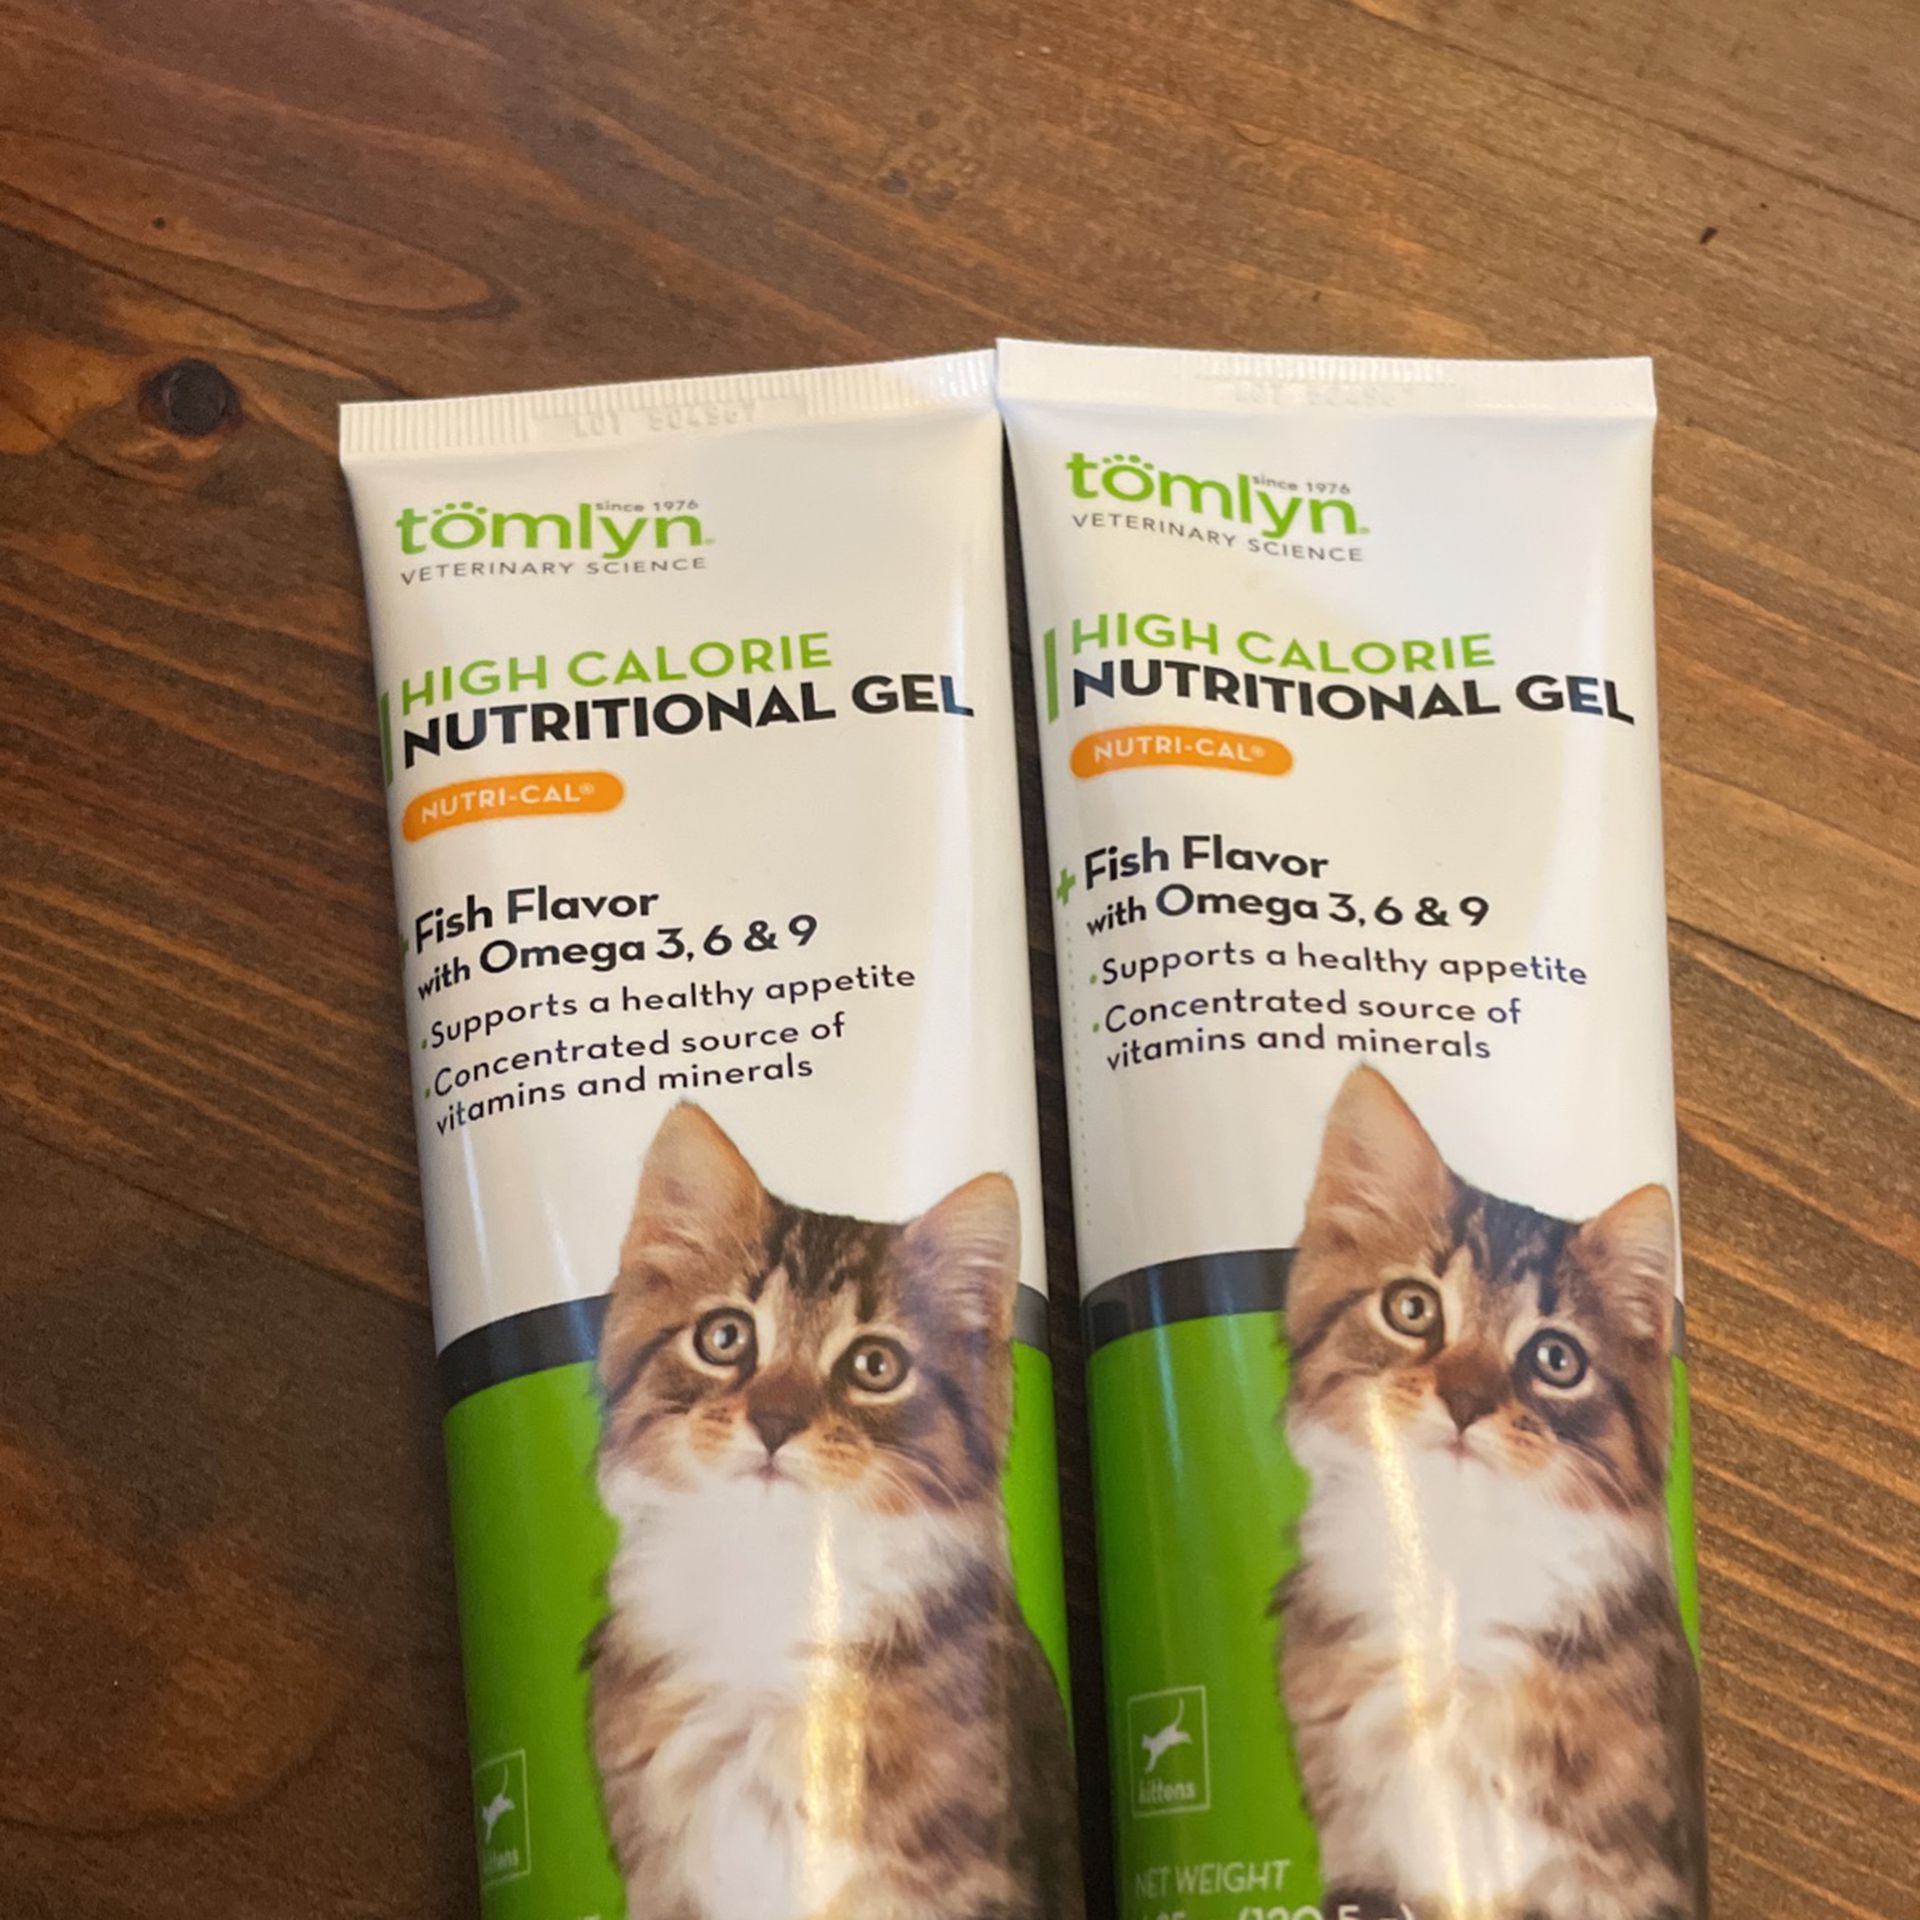 High calorie nutritional gel for kittens and cats